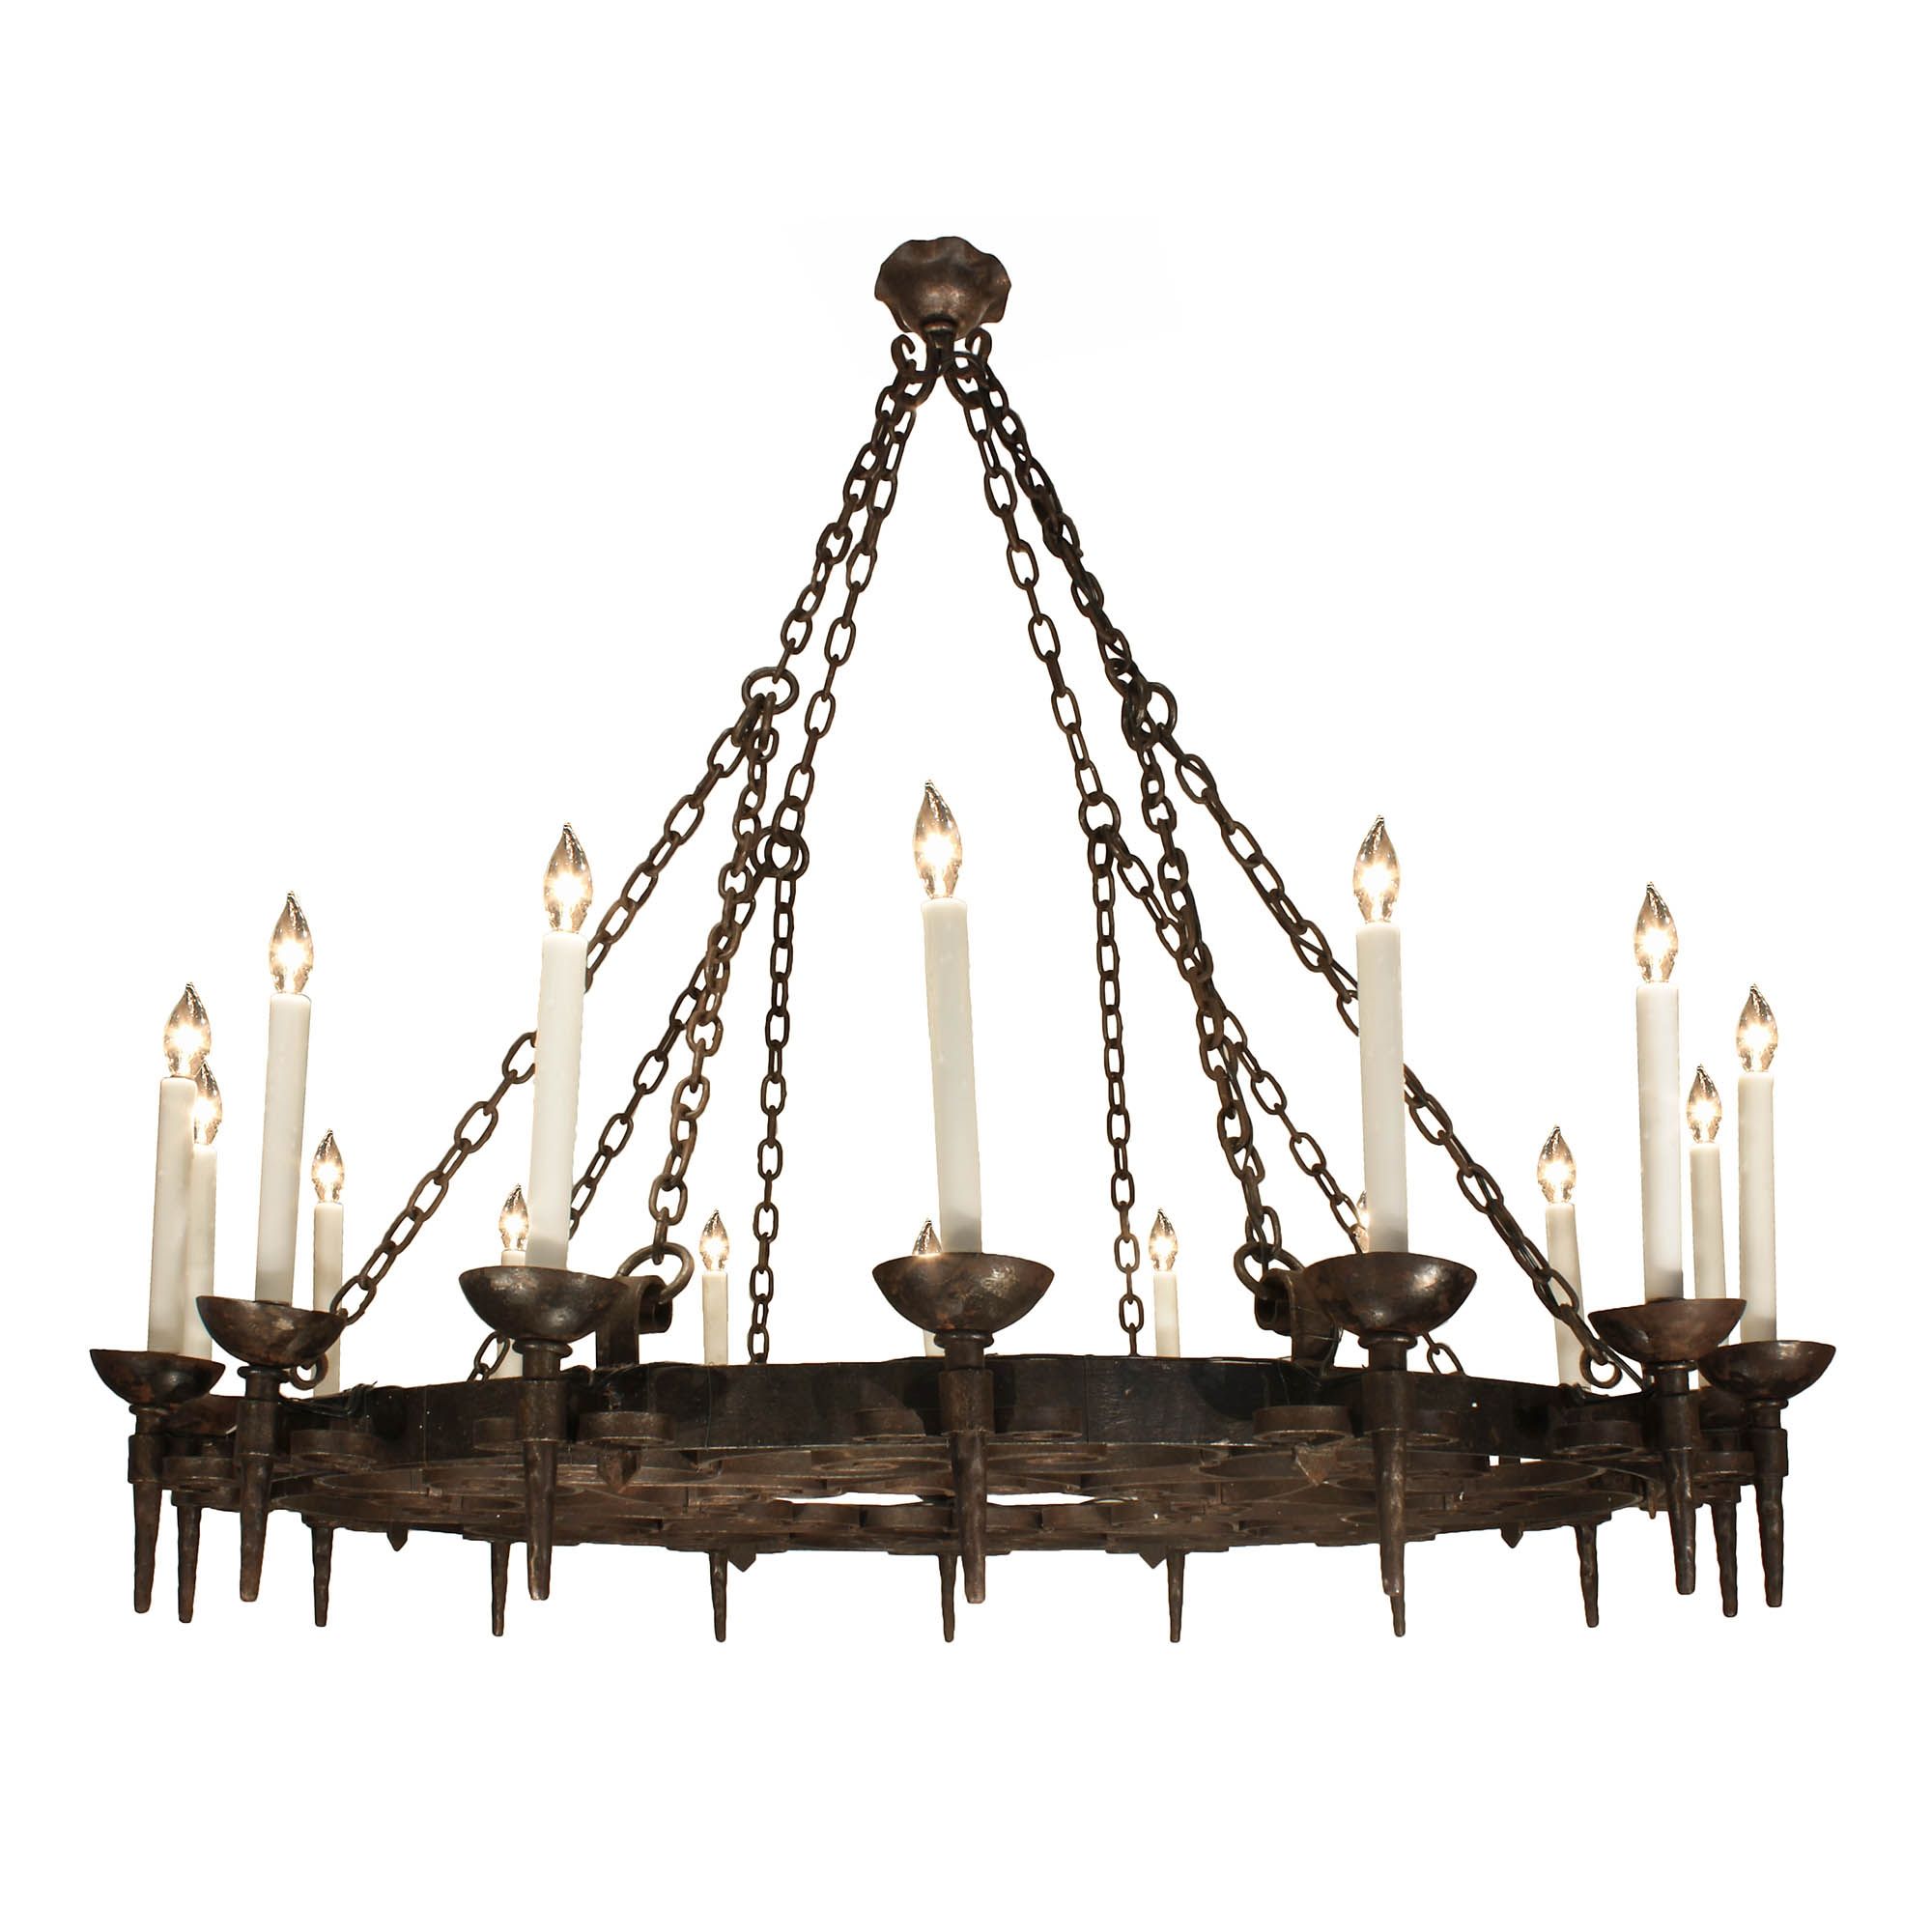 Antique Chandeliers Inventory Pertaining To Large Iron Chandeliers (View 7 of 15)